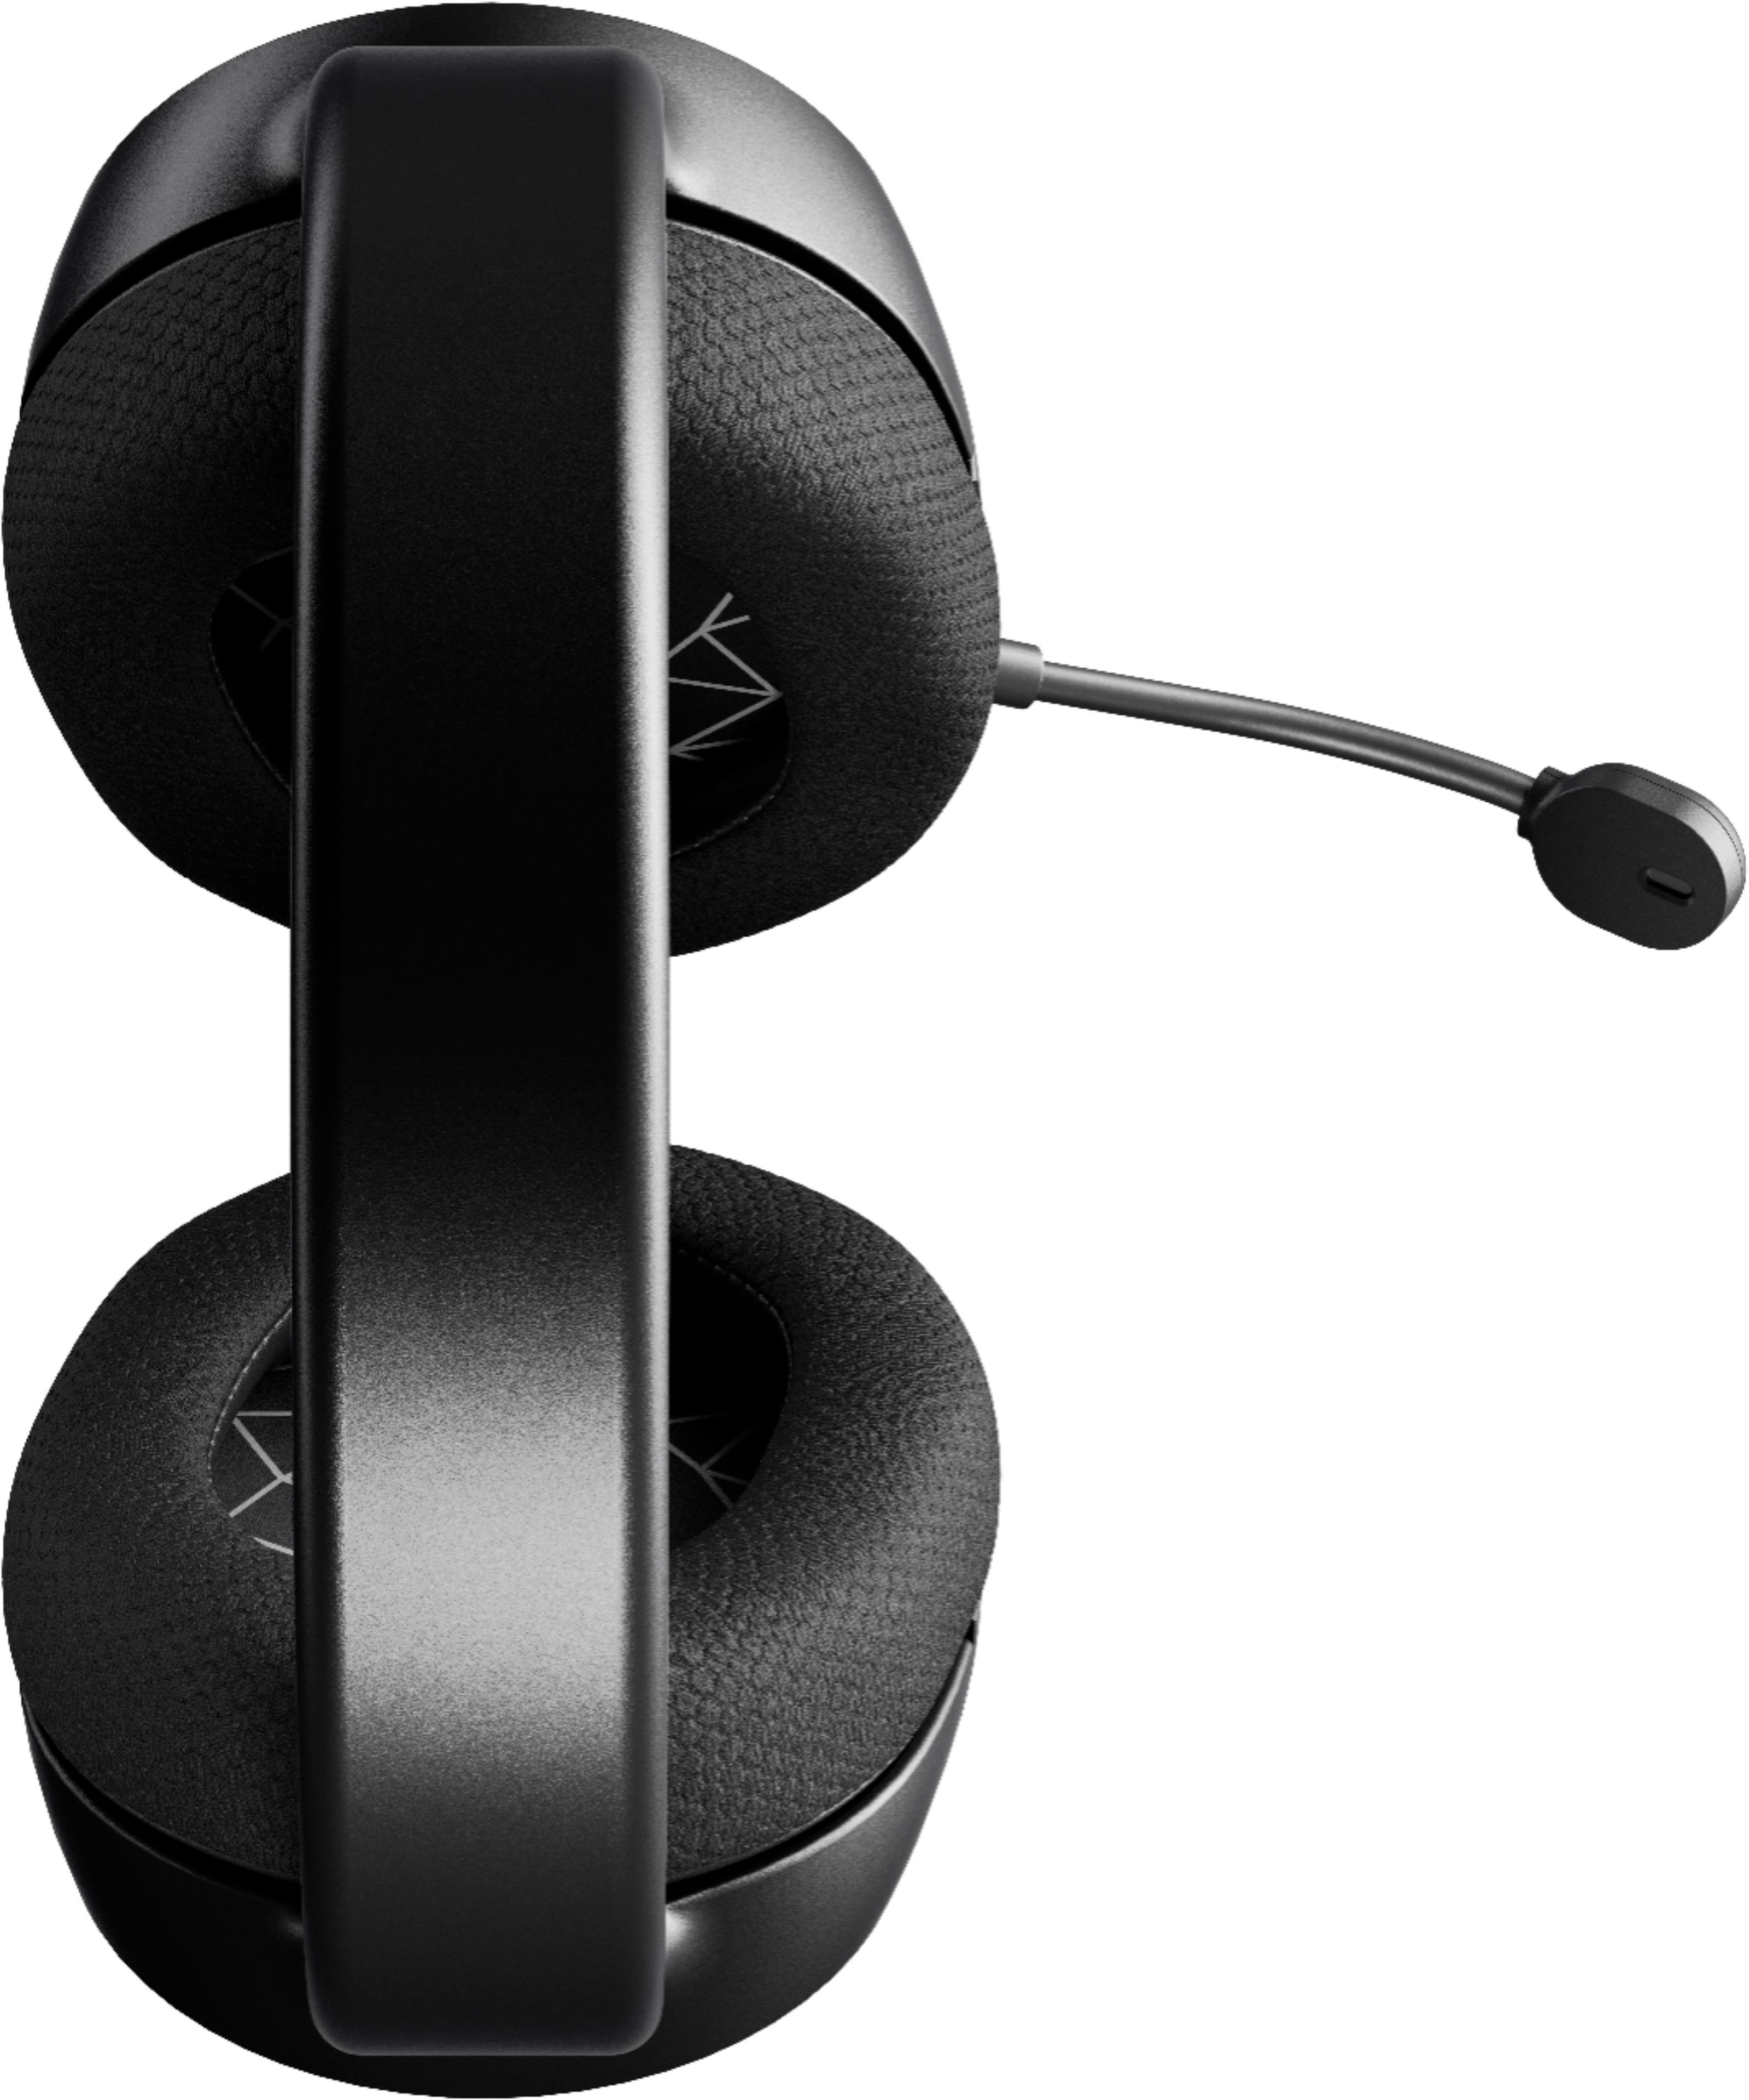 Steelseries Arctis 1 Wireless Gaming Headset For Xbox Series X And Xbox Series S Xbox One Black Best Buy